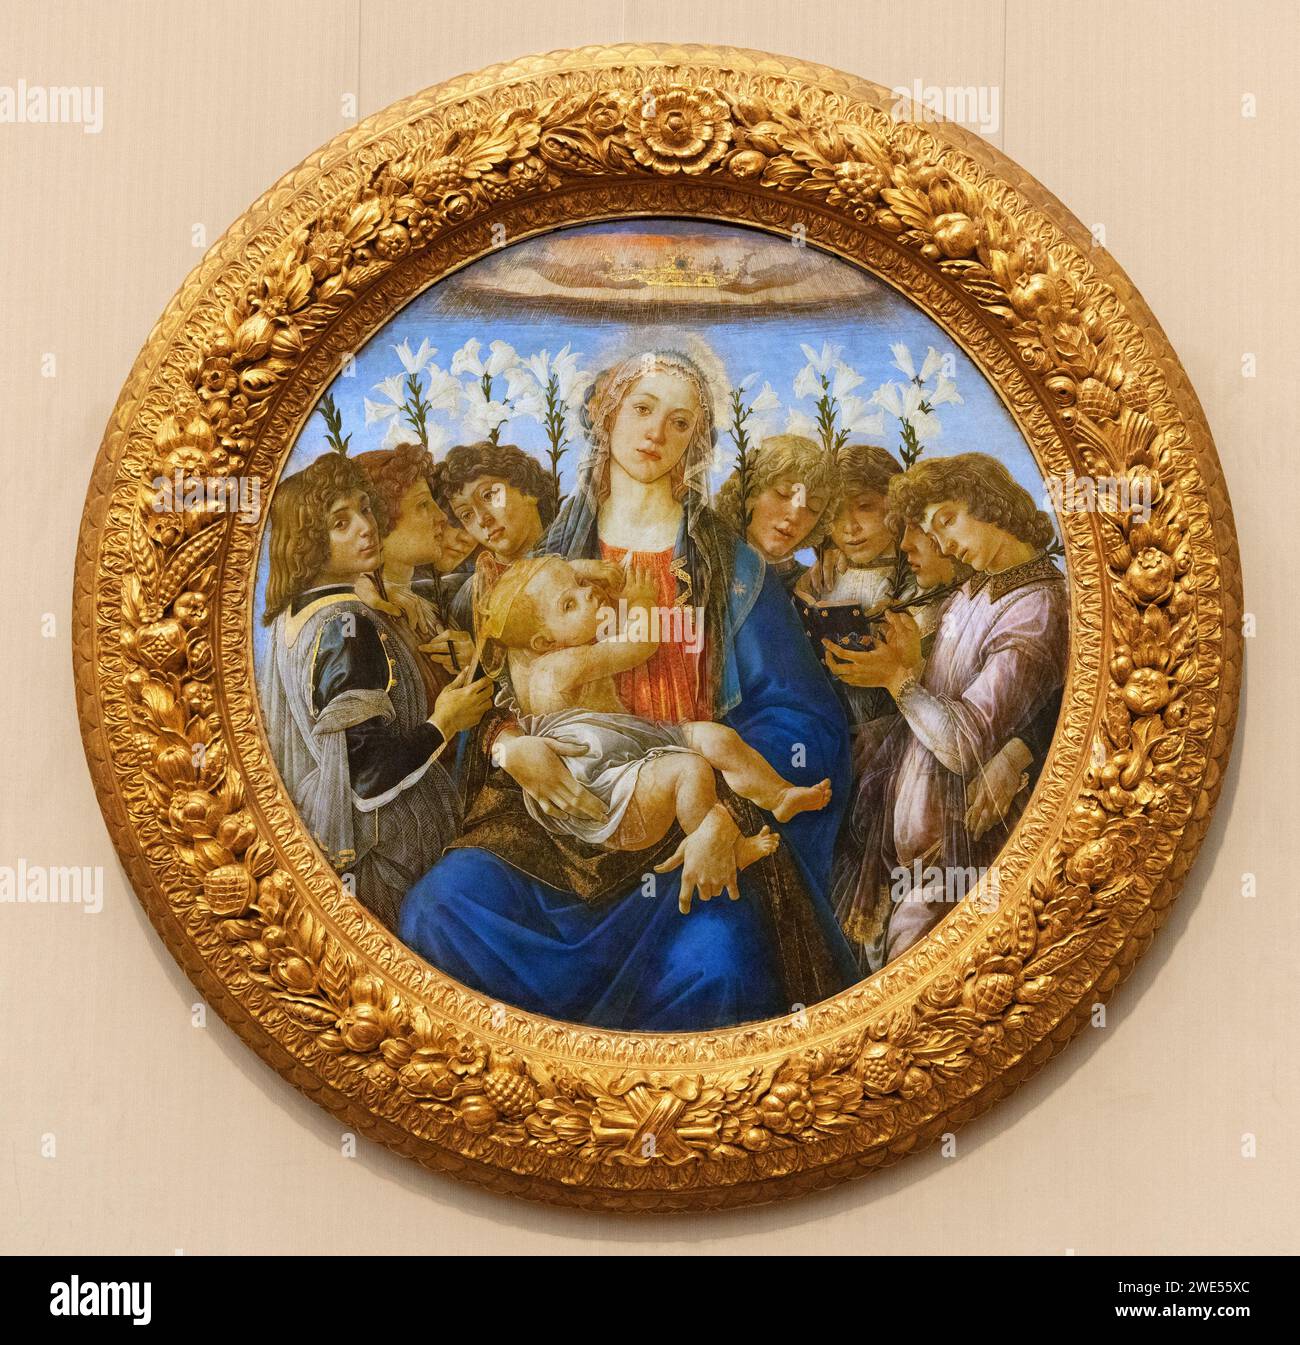 Sandro Botticelli painting; 'The Virgin and Child with Singing Angels'; c. 1478, 15th century Italian Renaissance art, a round painting or 'Tondo' Stock Photo